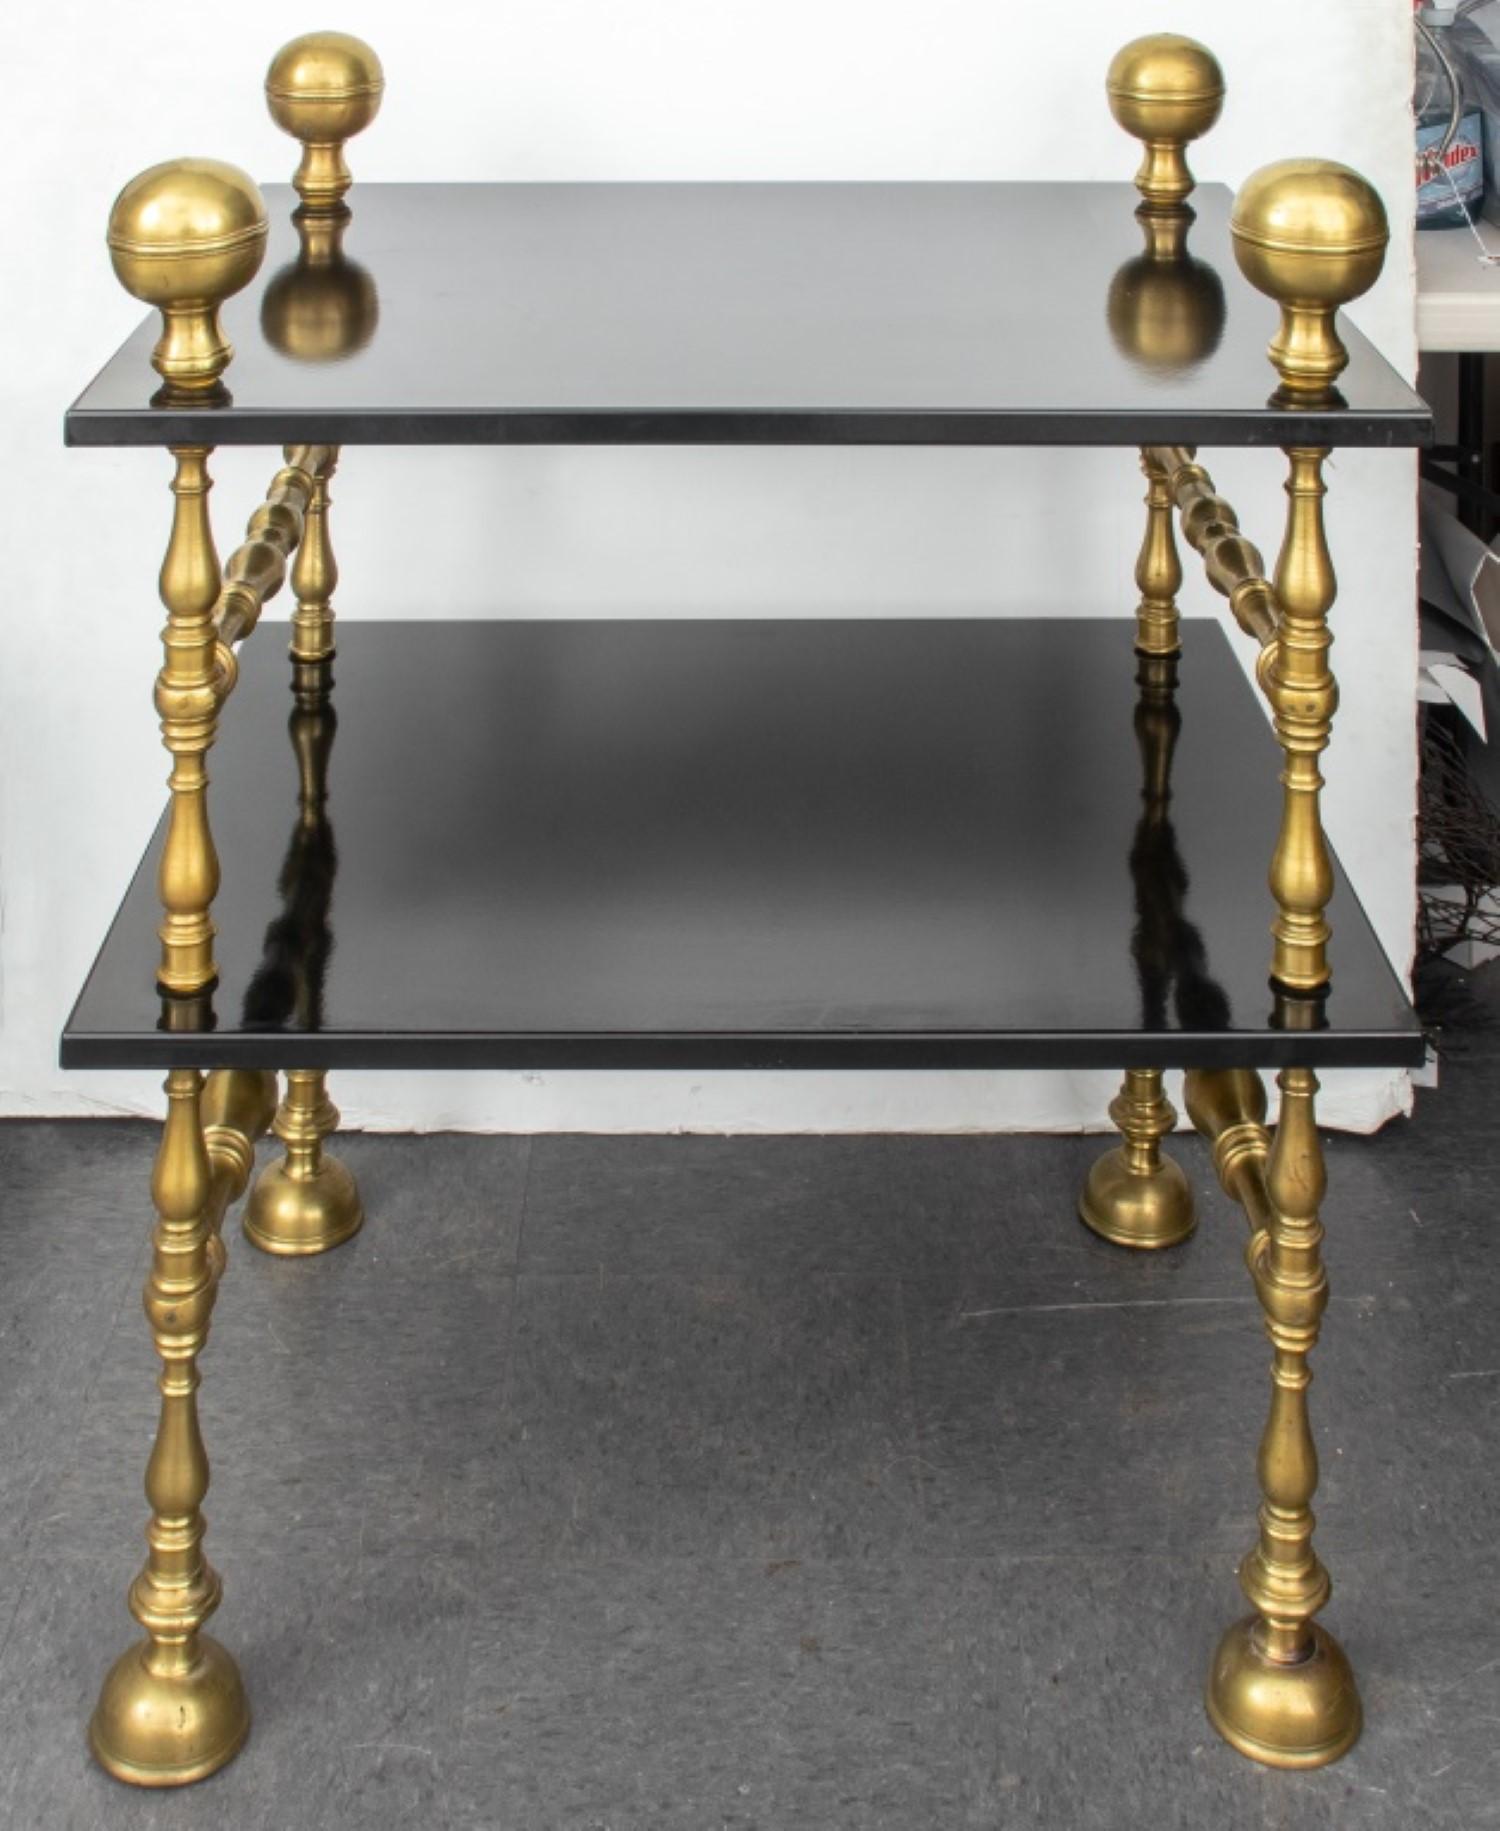 
The dimensions for the Baroque Revival etagere table are as follows:

Height: 40.5